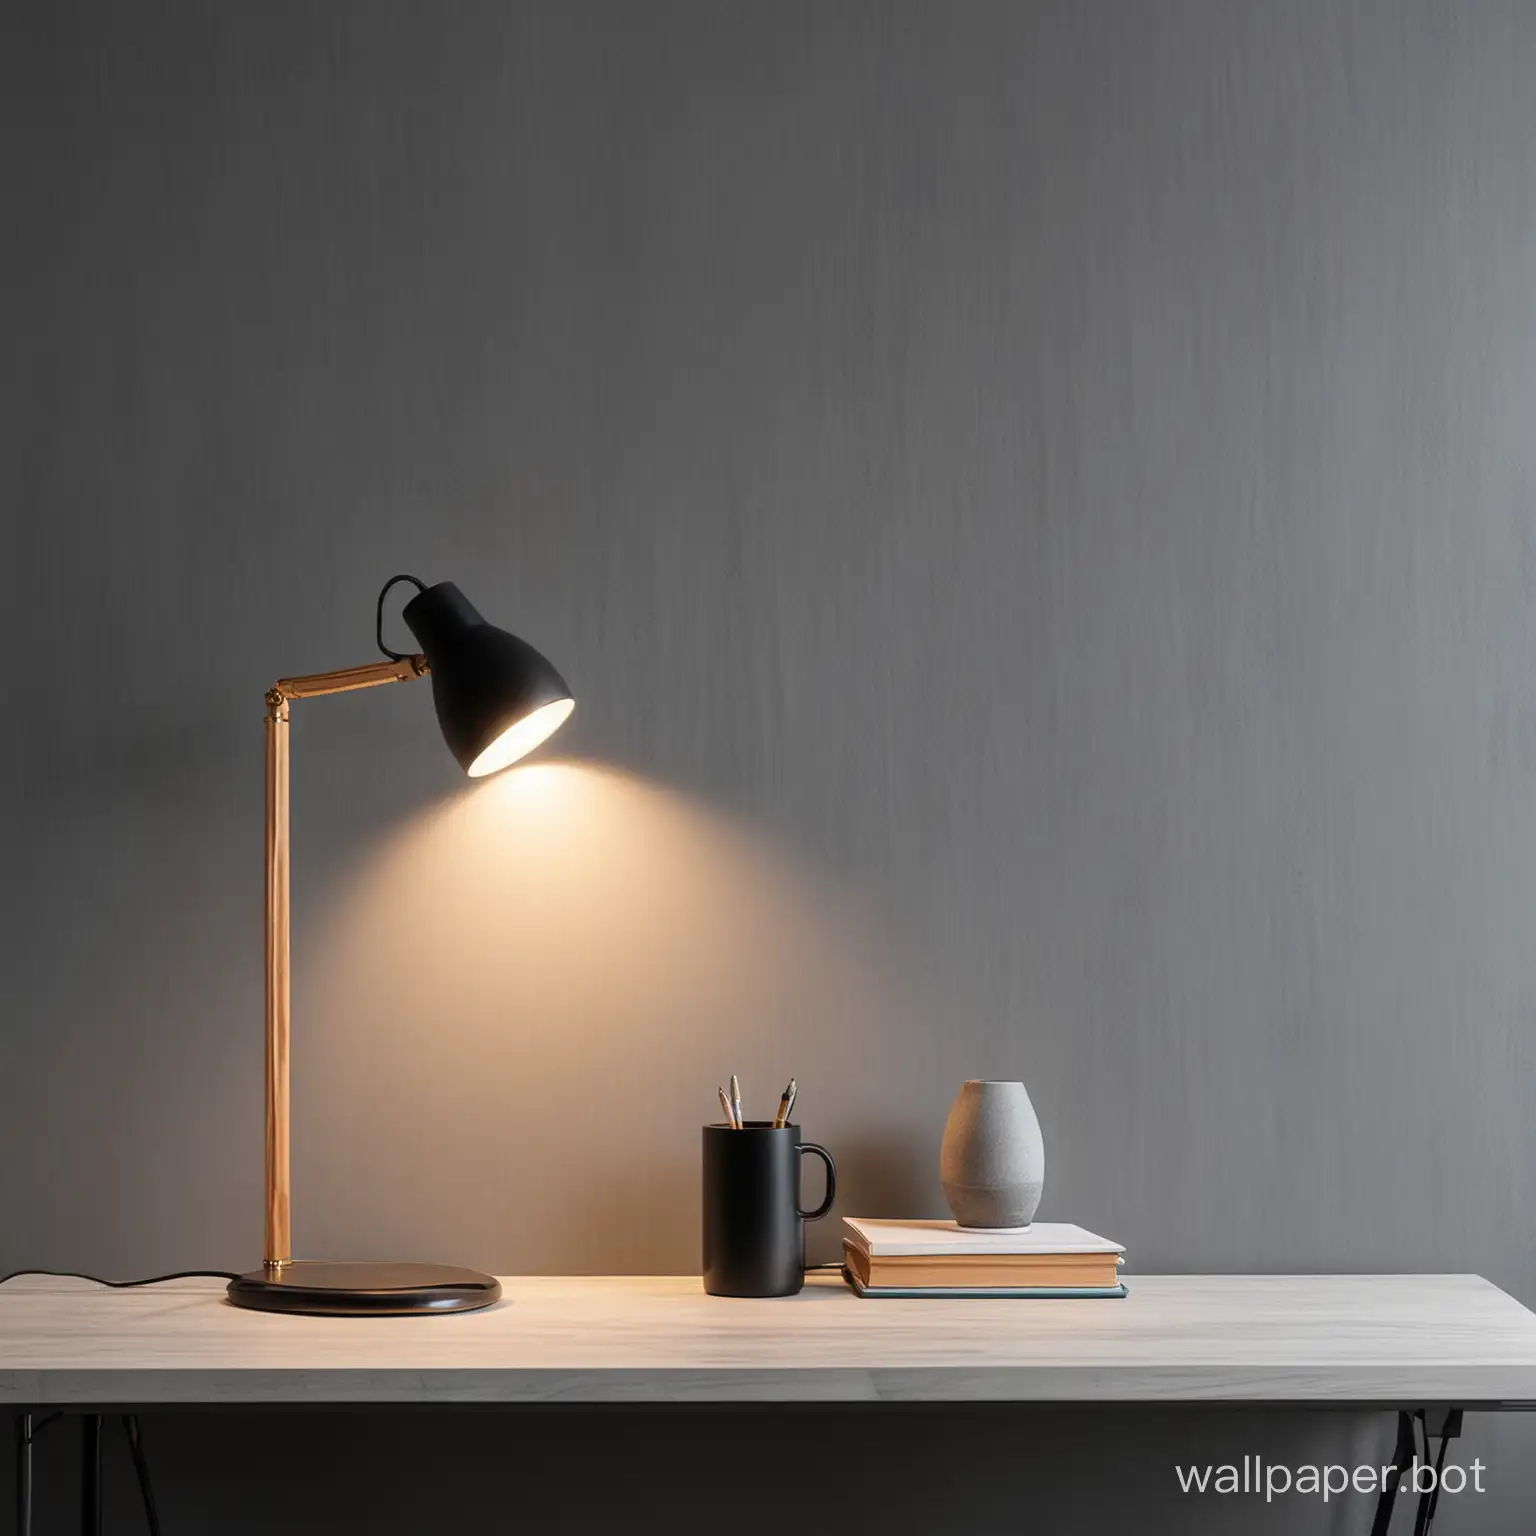 minimalist gray office wallpaper with one wood item and one black item with the focus on a lamp